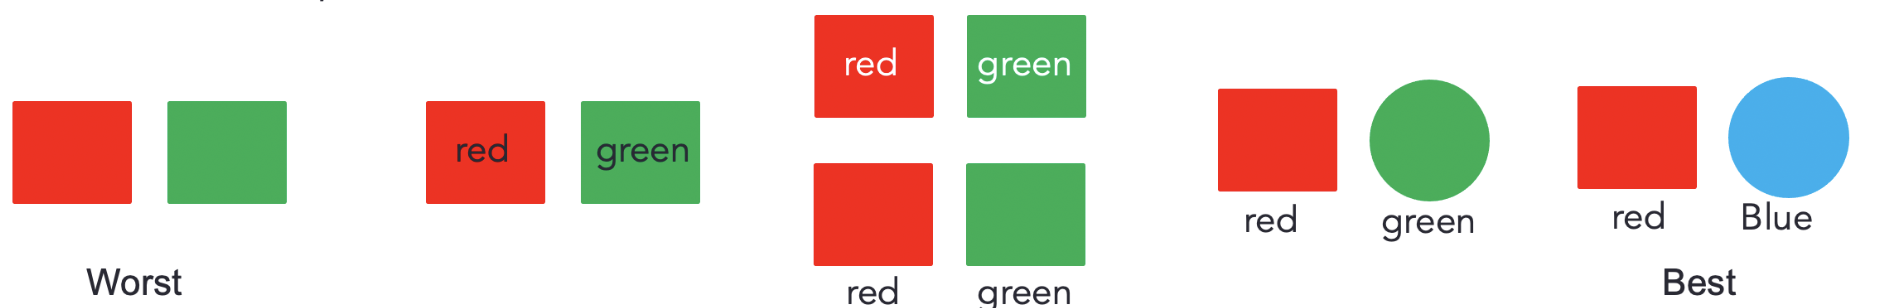 Pairs of colours and shapes: 1) red square and green square = worst (no labels); 2) red square with black "red" label inside; green square with black "green" label inside (poor colour contrast); red square with white "red" label inside and green square with white "green" label inside (better); red square with black "red"